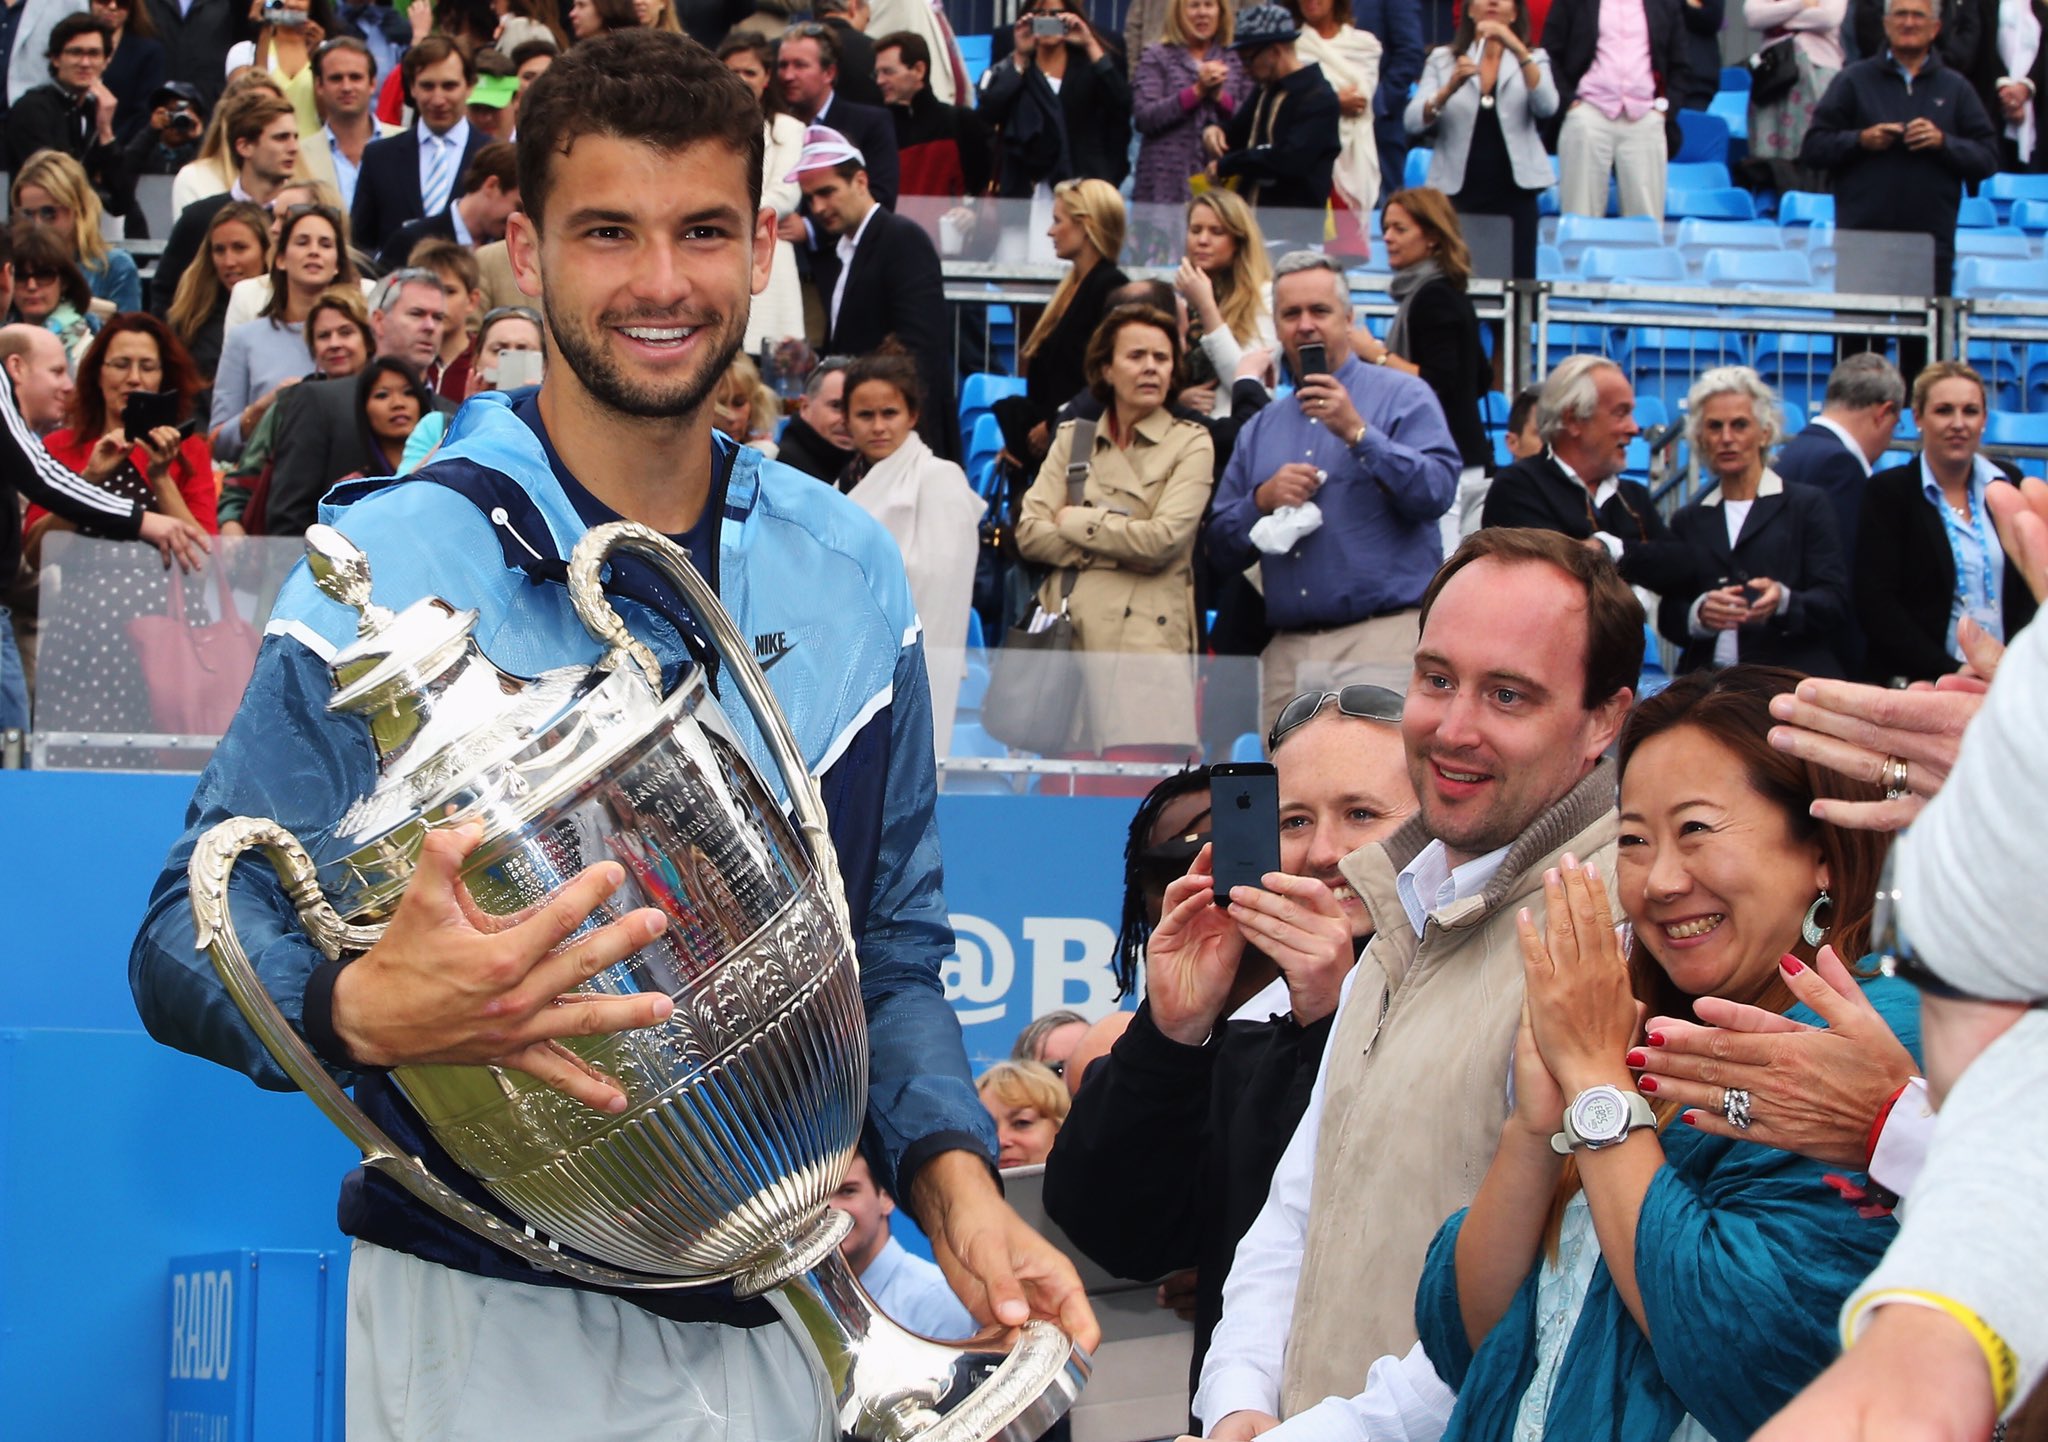 Happy birthday to Grigor Dimitrov, our much-loved 2014 champion!

26 today. 

See you soon, Grigor. 